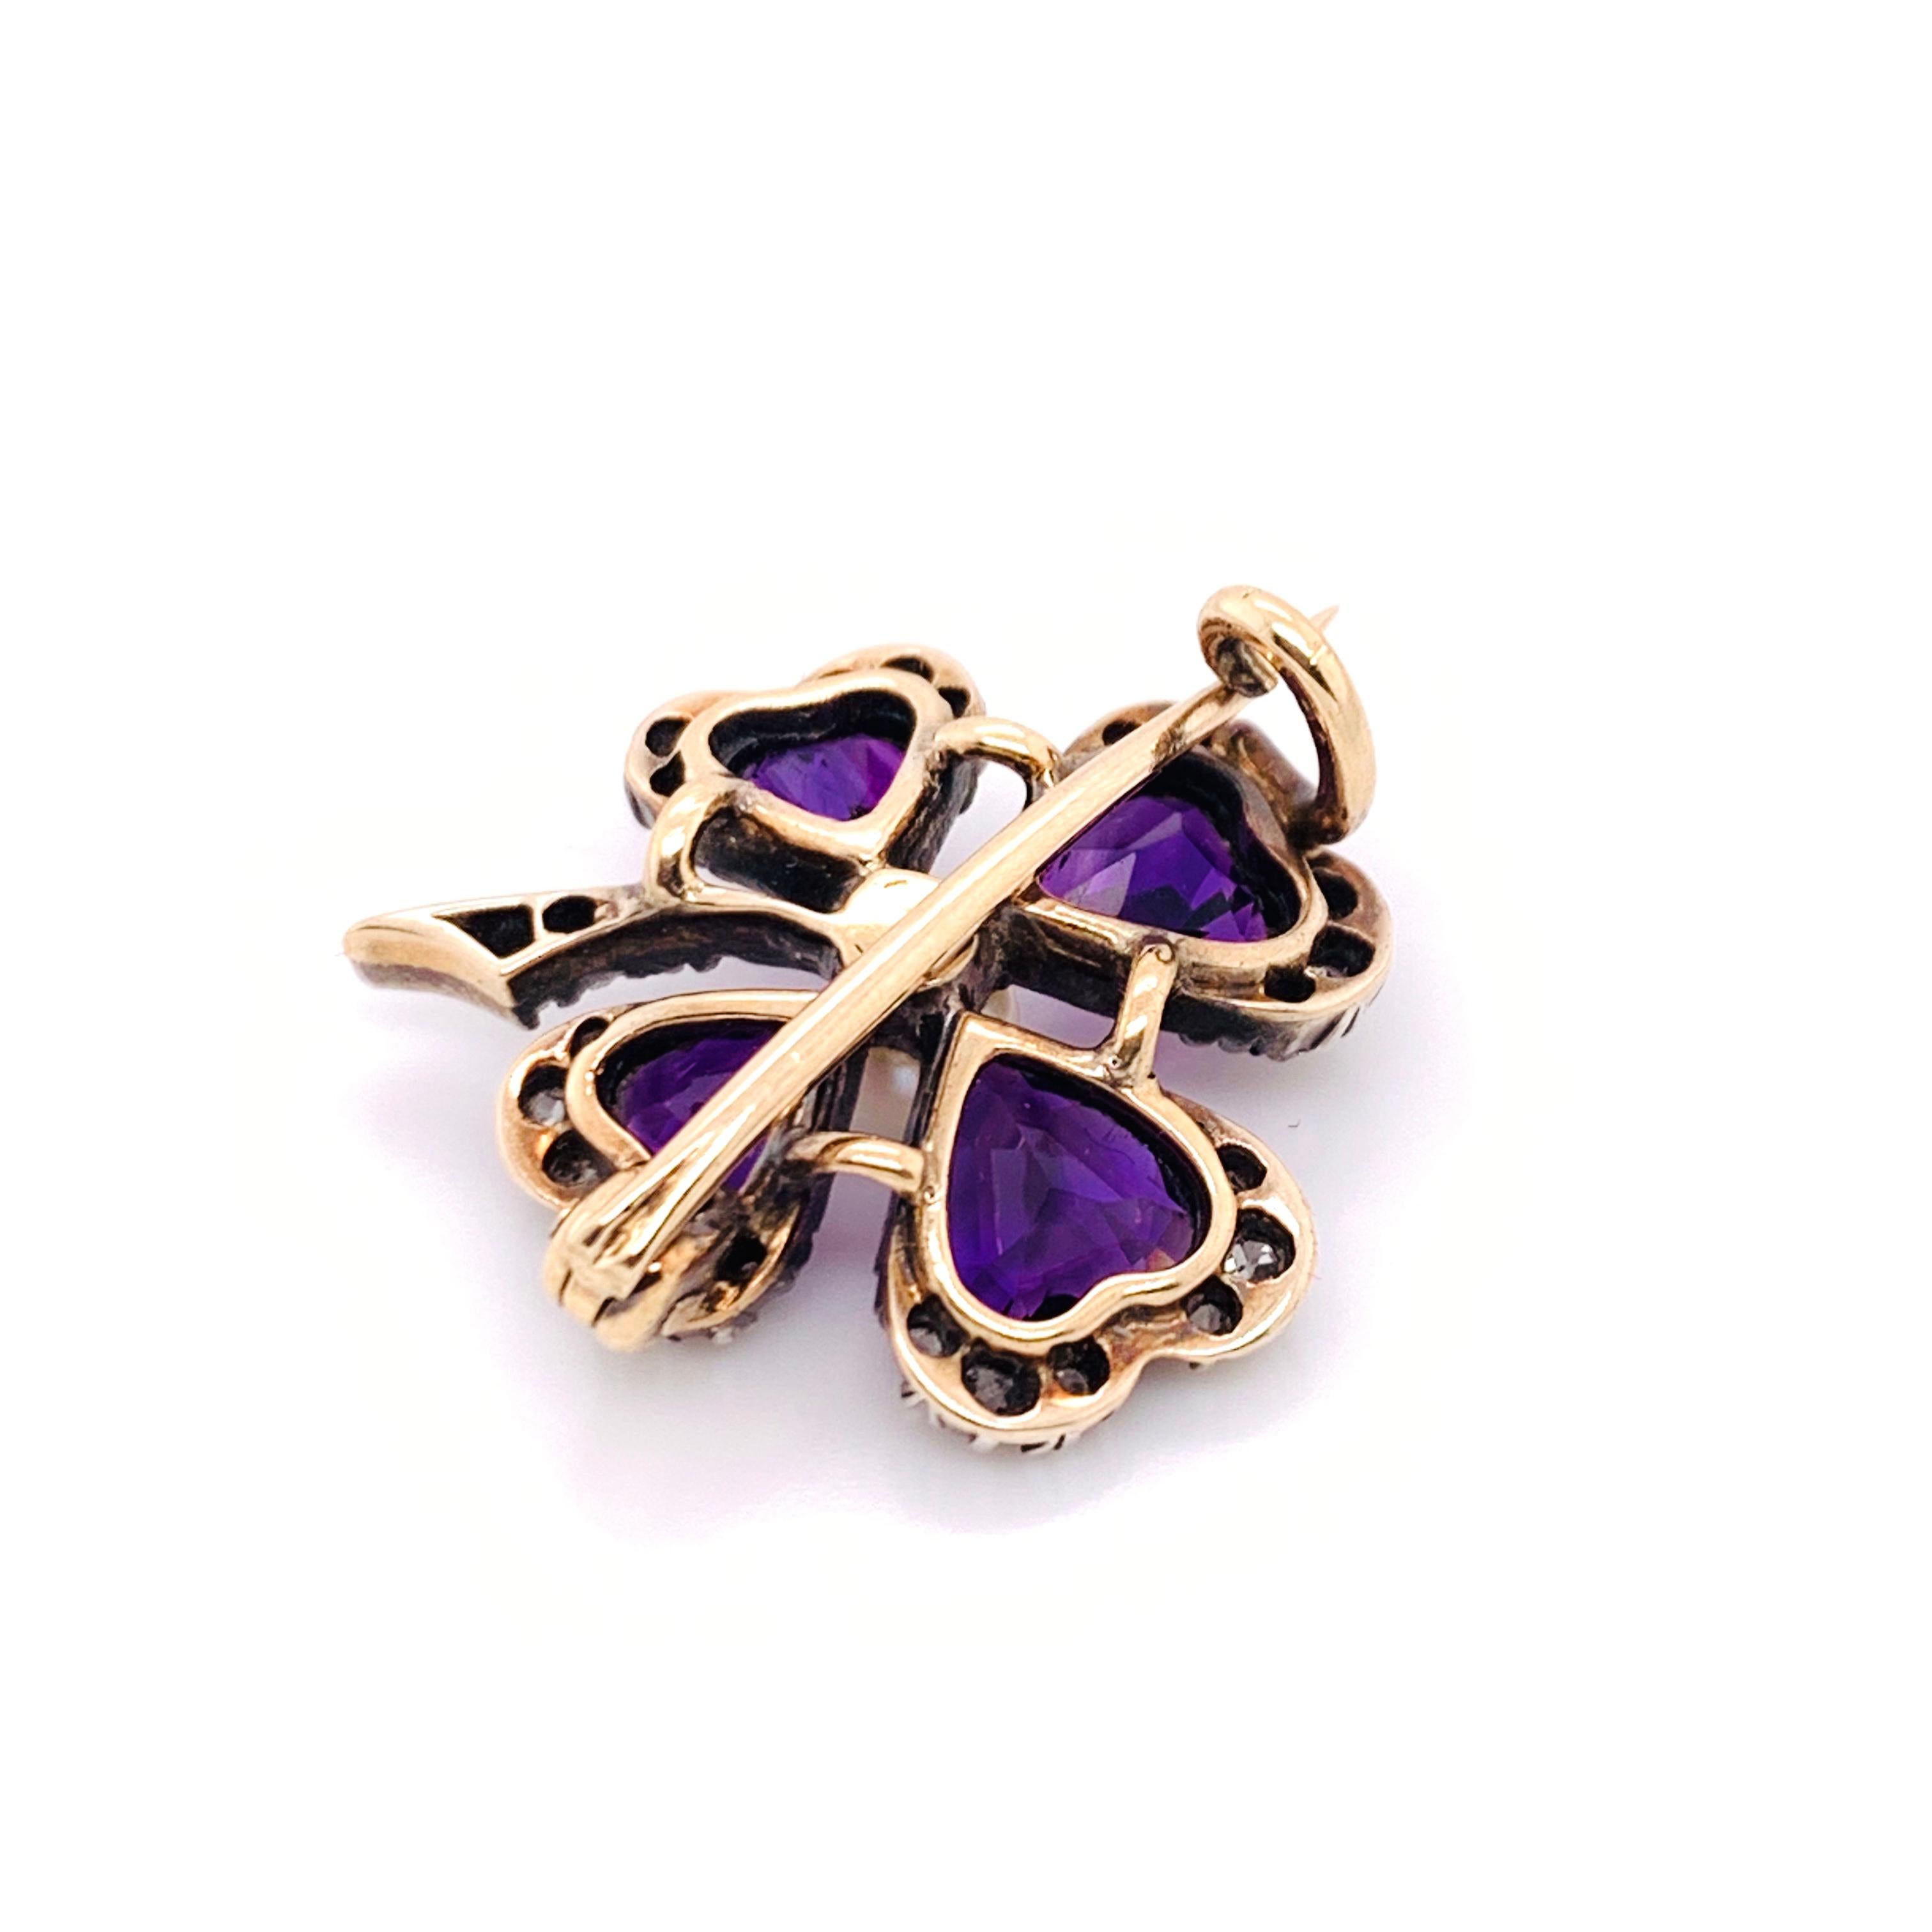 A Victorian amethyst and diamond four leaf clover brooch, with a natural pearl in the centre, with four pear shaped amethysts, edged with old-cut diamonds in cut down settings, mounted in silver-upon-gold. English, circa 1890.